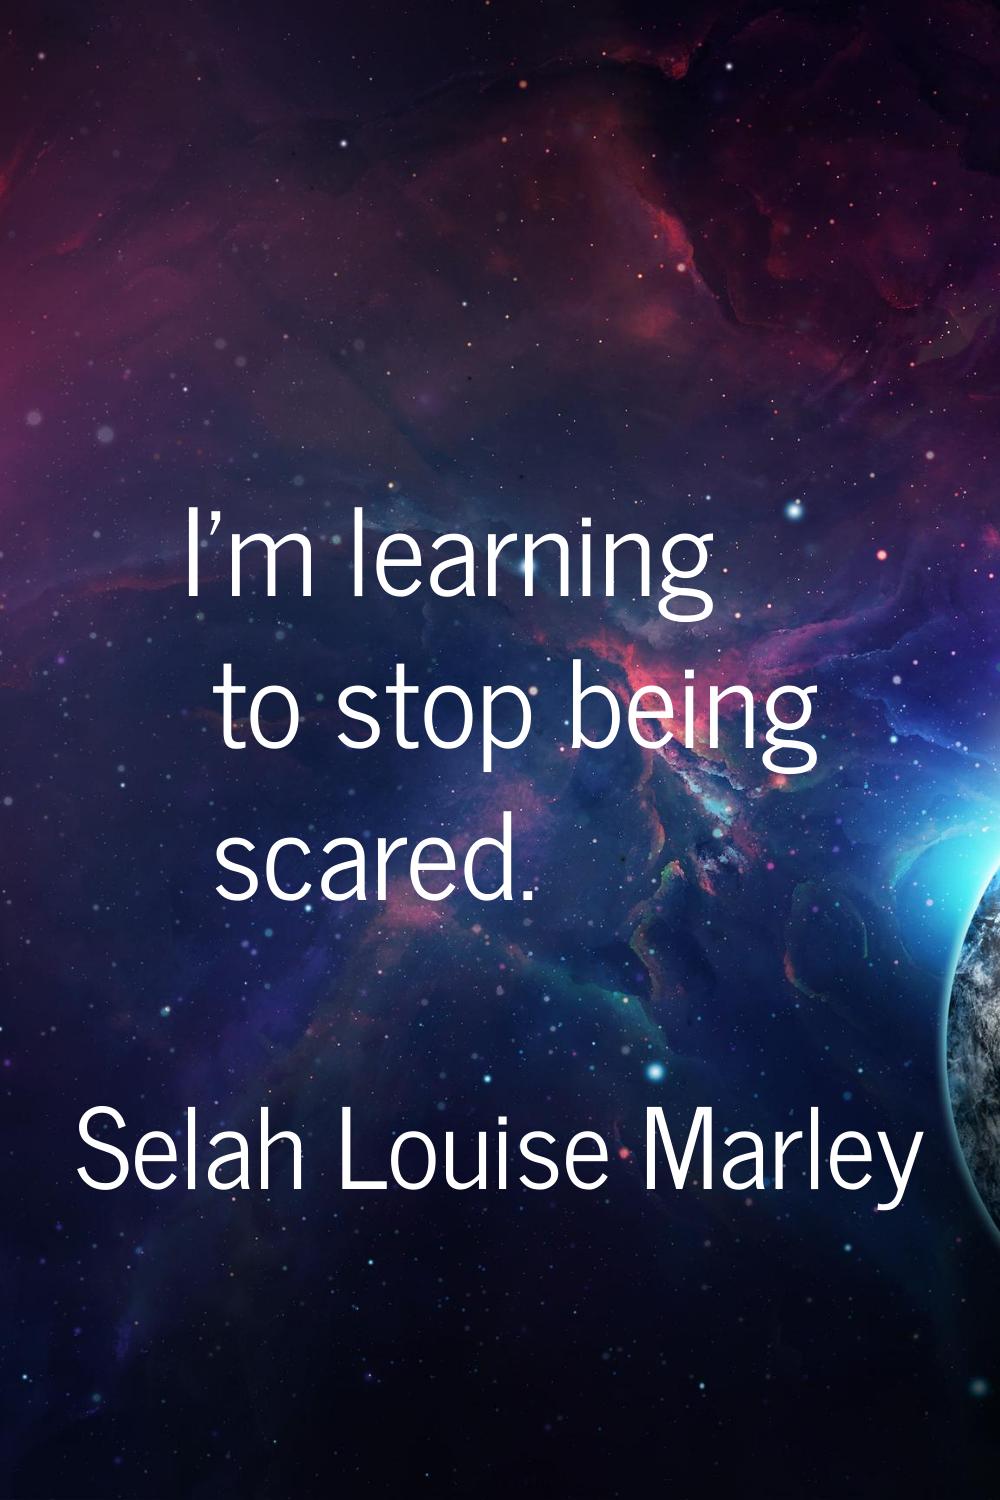 I'm learning to stop being scared.